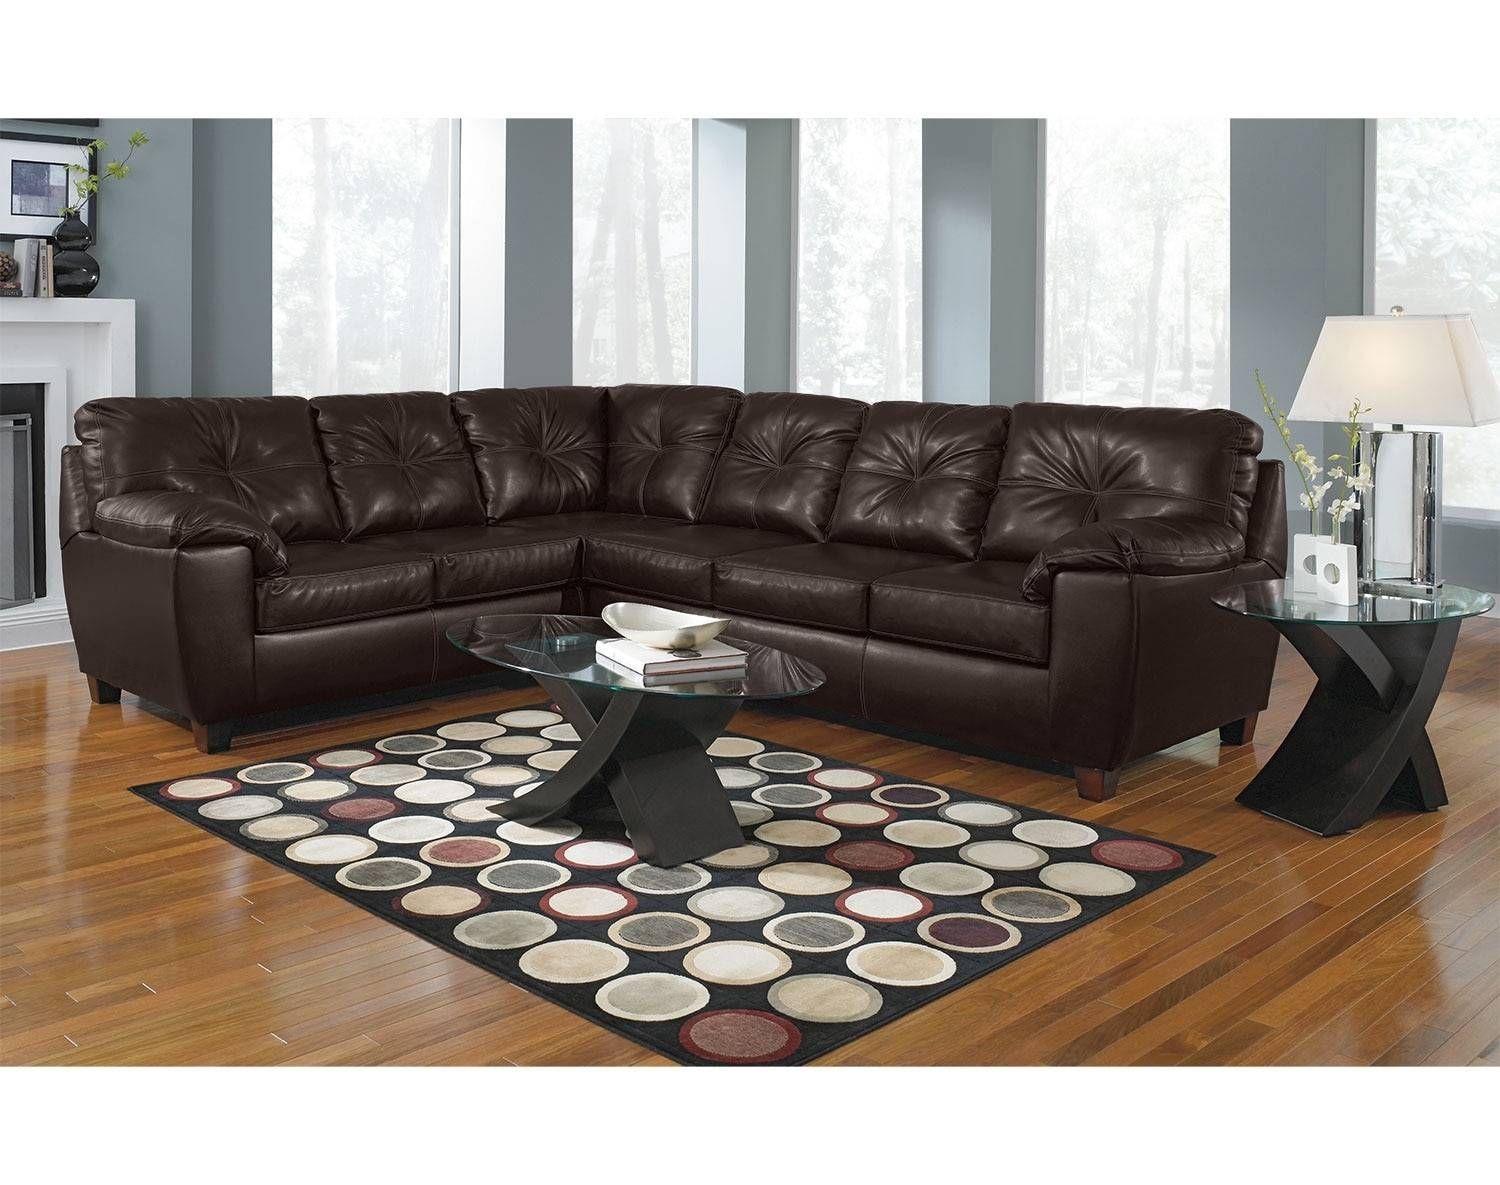 Living Room Furniture | Value City Furniture Intended For 10 Piece Sectional Sofa (Photo 149 of 299)